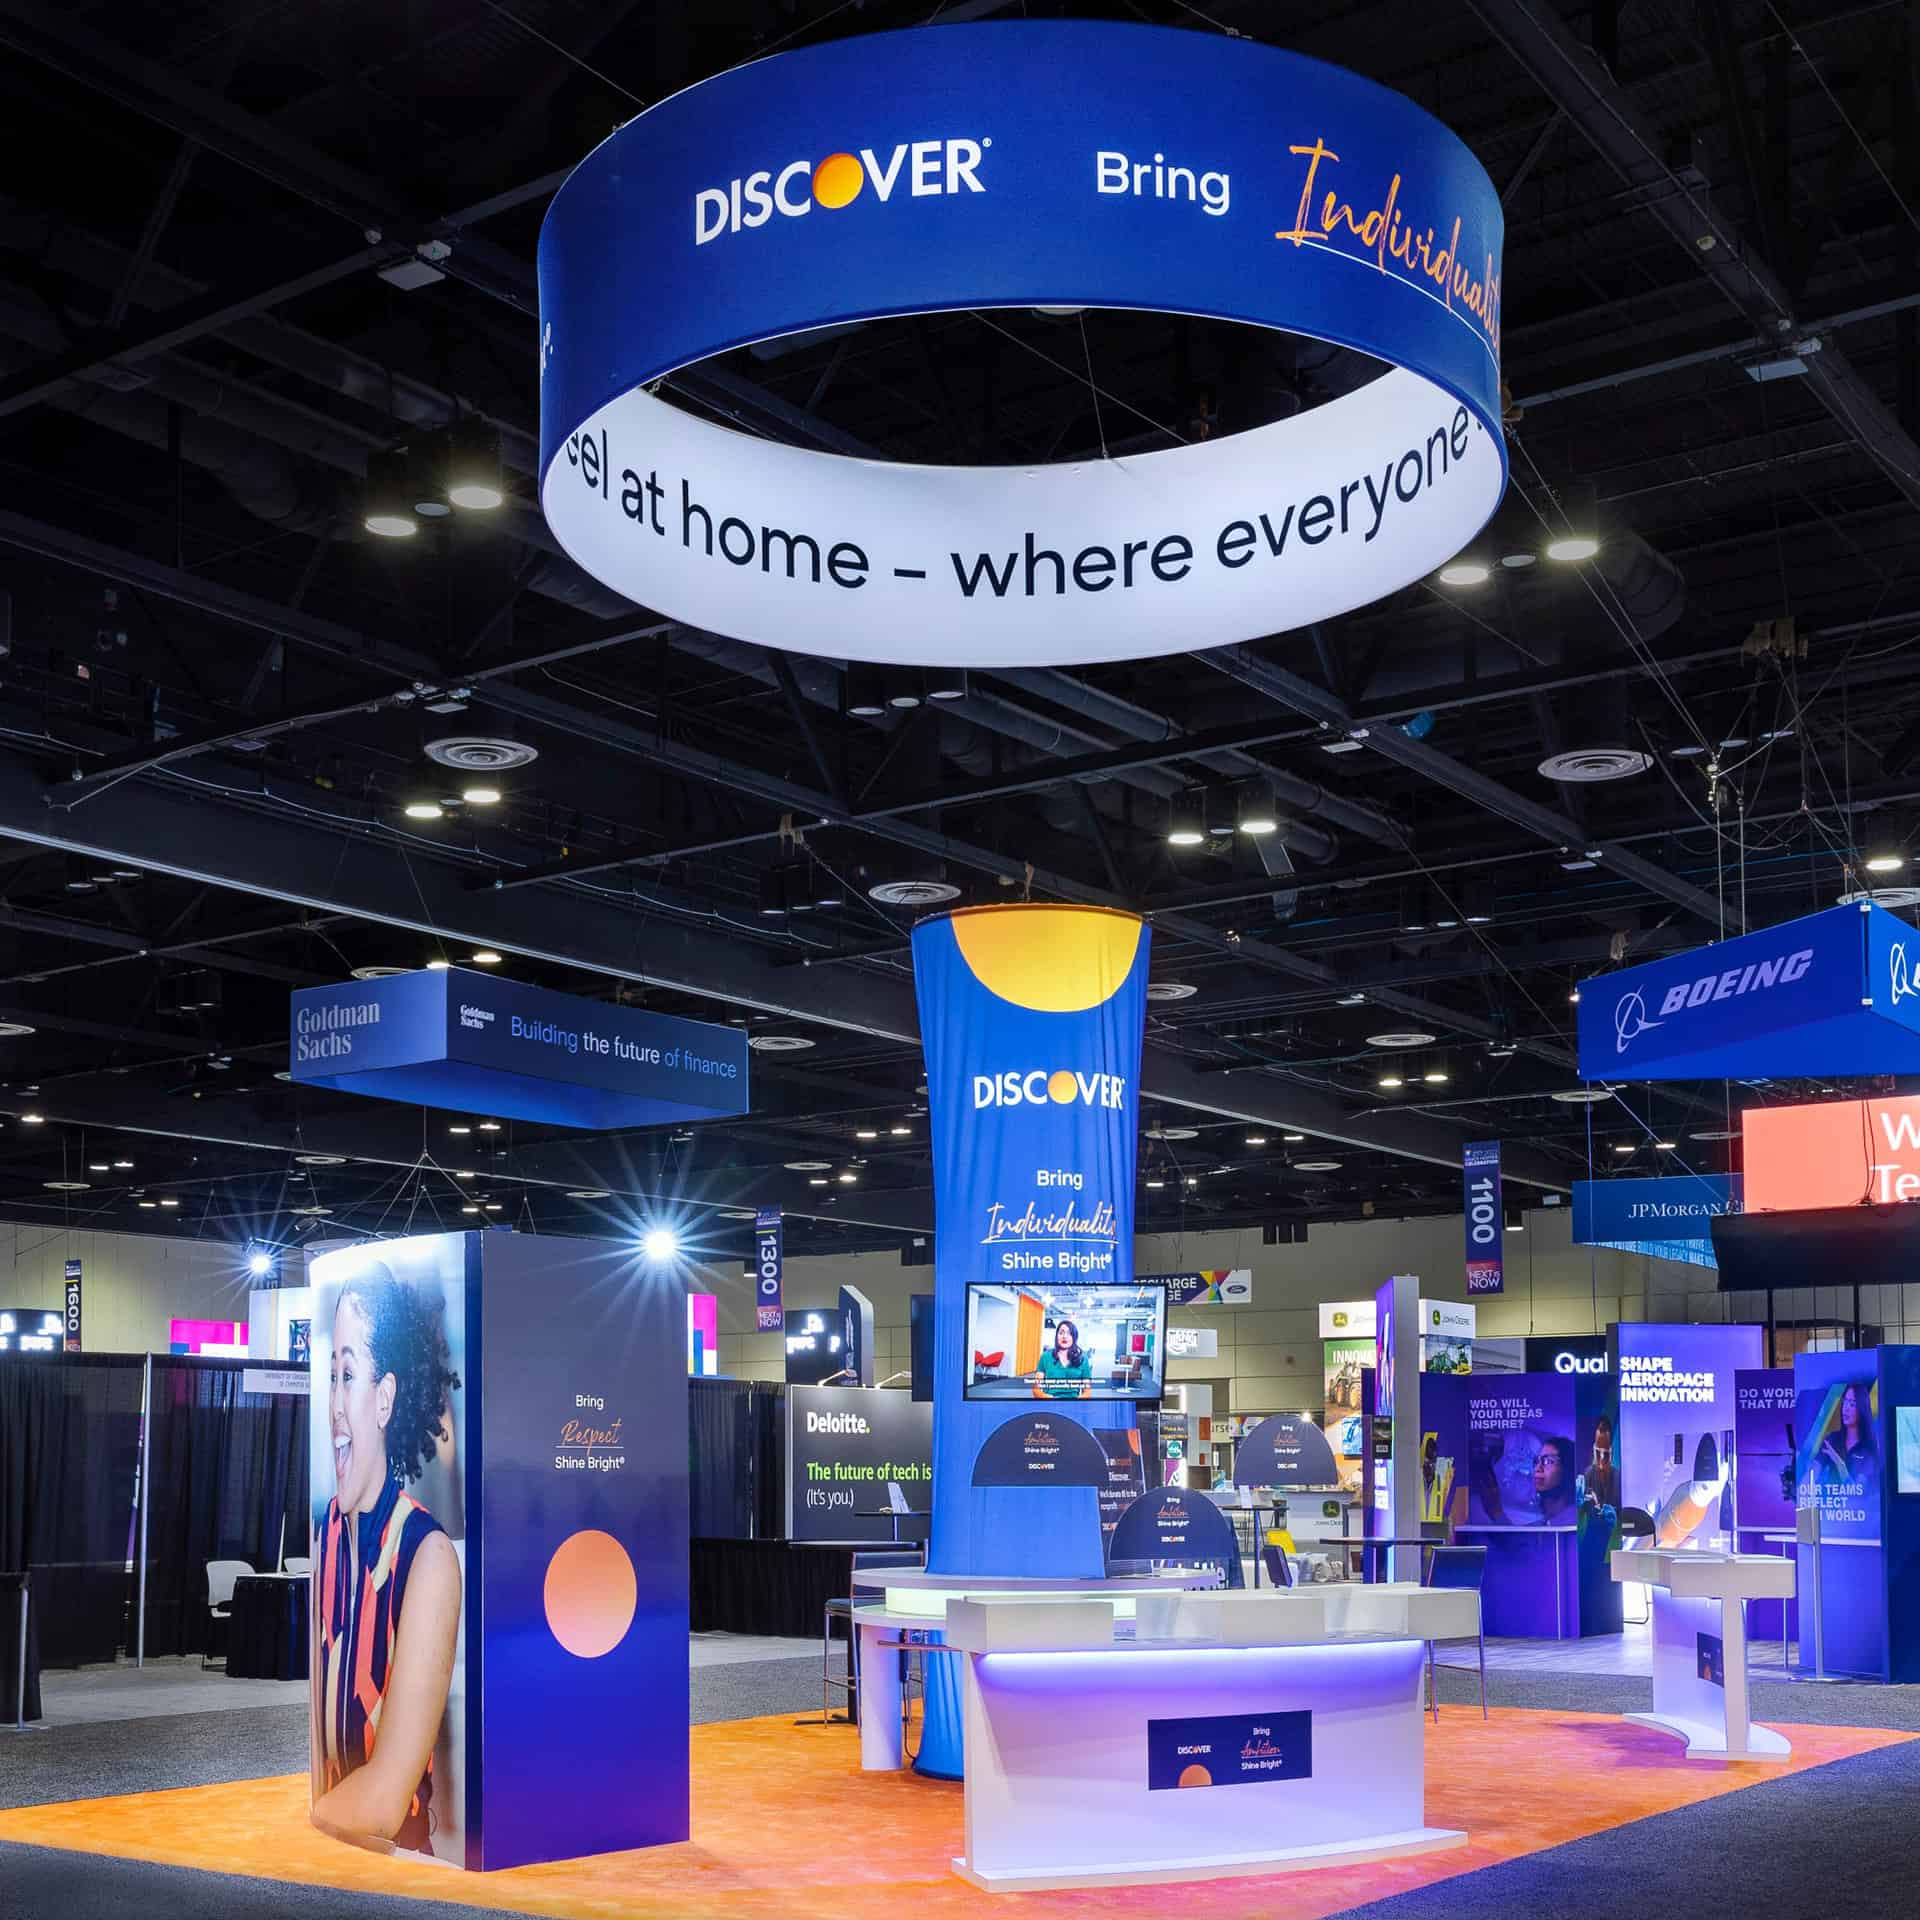 A trade show booth featuring a vibrant blue and orange sign showcasing commercial printing services.